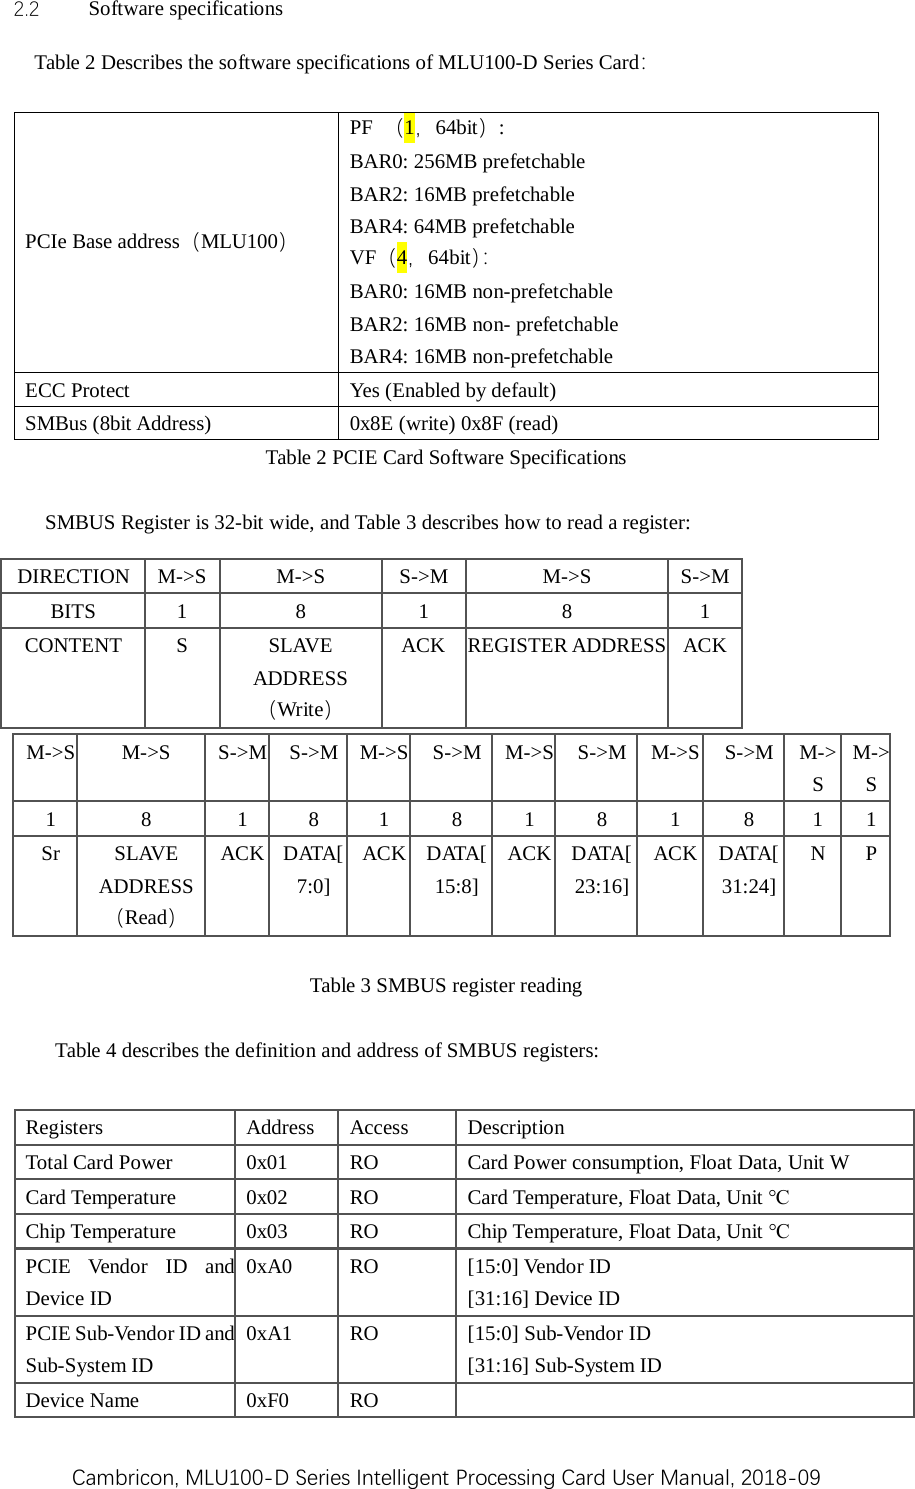 Cambricon, MLU100-D Series Intelligent Processing Card User Manual, 2018-09 2.2 Software specifications Table 2 Describes the software specifications of MLU100-D Series Card：    PCIe Base address（MLU100） PF （1，64bit）:   BAR0: 256MB prefetchable BAR2: 16MB prefetchable BAR4: 64MB prefetchable VF（4，64bit）：  BAR0: 16MB non-prefetchable BAR2: 16MB non- prefetchable BAR4: 16MB non-prefetchable ECC Protect  Yes (Enabled by default) SMBus (8bit Address)    0x8E (write) 0x8F (read) Table 2 PCIE Card Software Specifications     SMBUS Register is 32-bit wide, and Table 3 describes how to read a register:       M-&gt;S M-&gt;S  S-&gt;M S-&gt;M  M-&gt;S S-&gt;M  M-&gt;S S-&gt;M  M-&gt;S S-&gt;M  M-&gt;S M-&gt;S 1  8  1  8  1  8  1  8  1  8  1  1 Sr SLAVE ADDRESS（Read） ACK DATA[7:0] ACK DATA[15:8] ACK DATA[23:16] ACK DATA[31:24] N  P  Table 3 SMBUS register reading  Table 4 describes the definition and address of SMBUS registers: DIRECTION  M-&gt;S  M-&gt;S  S-&gt;M  M-&gt;S  S-&gt;M BITS  1  8  1  8  1 CONTENT  S  SLAVE ADDRESS（Write） ACK REGISTER ADDRESS ACK Registers  Address  Access Description Total Card Power  0x01  RO  Card Power consumption, Float Data, Unit W Card Temperature  0x02  RO  Card Temperature, Float Data, Unit ℃ Chip Temperature  0x03  RO  Chip Temperature, Float Data, Unit ℃ PCIE Vendor ID and Device ID 0xA0  RO [15:0] Vendor ID   [31:16] Device ID PCIE Sub-Vendor ID and Sub-System ID 0xA1  RO [15:0] Sub-Vendor ID [31:16] Sub-System ID       Device Name  0xF0  RO   